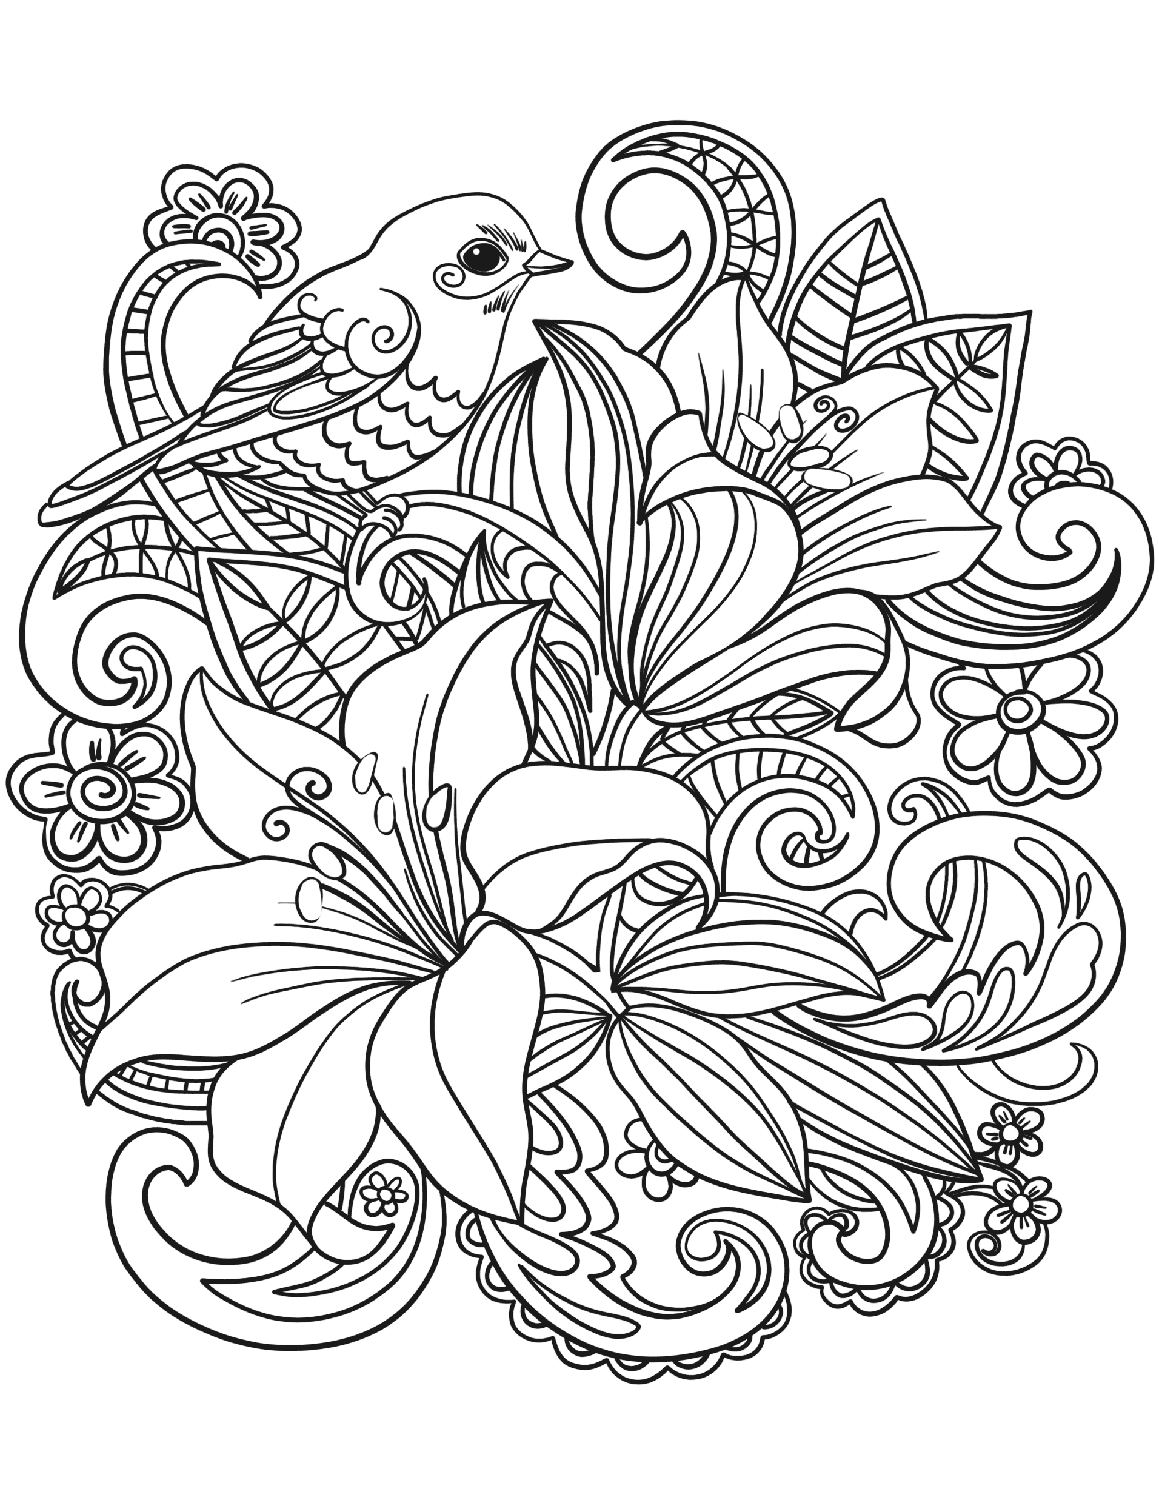 Download Floral Coloring Pages for Adults - Best Coloring Pages For Kids